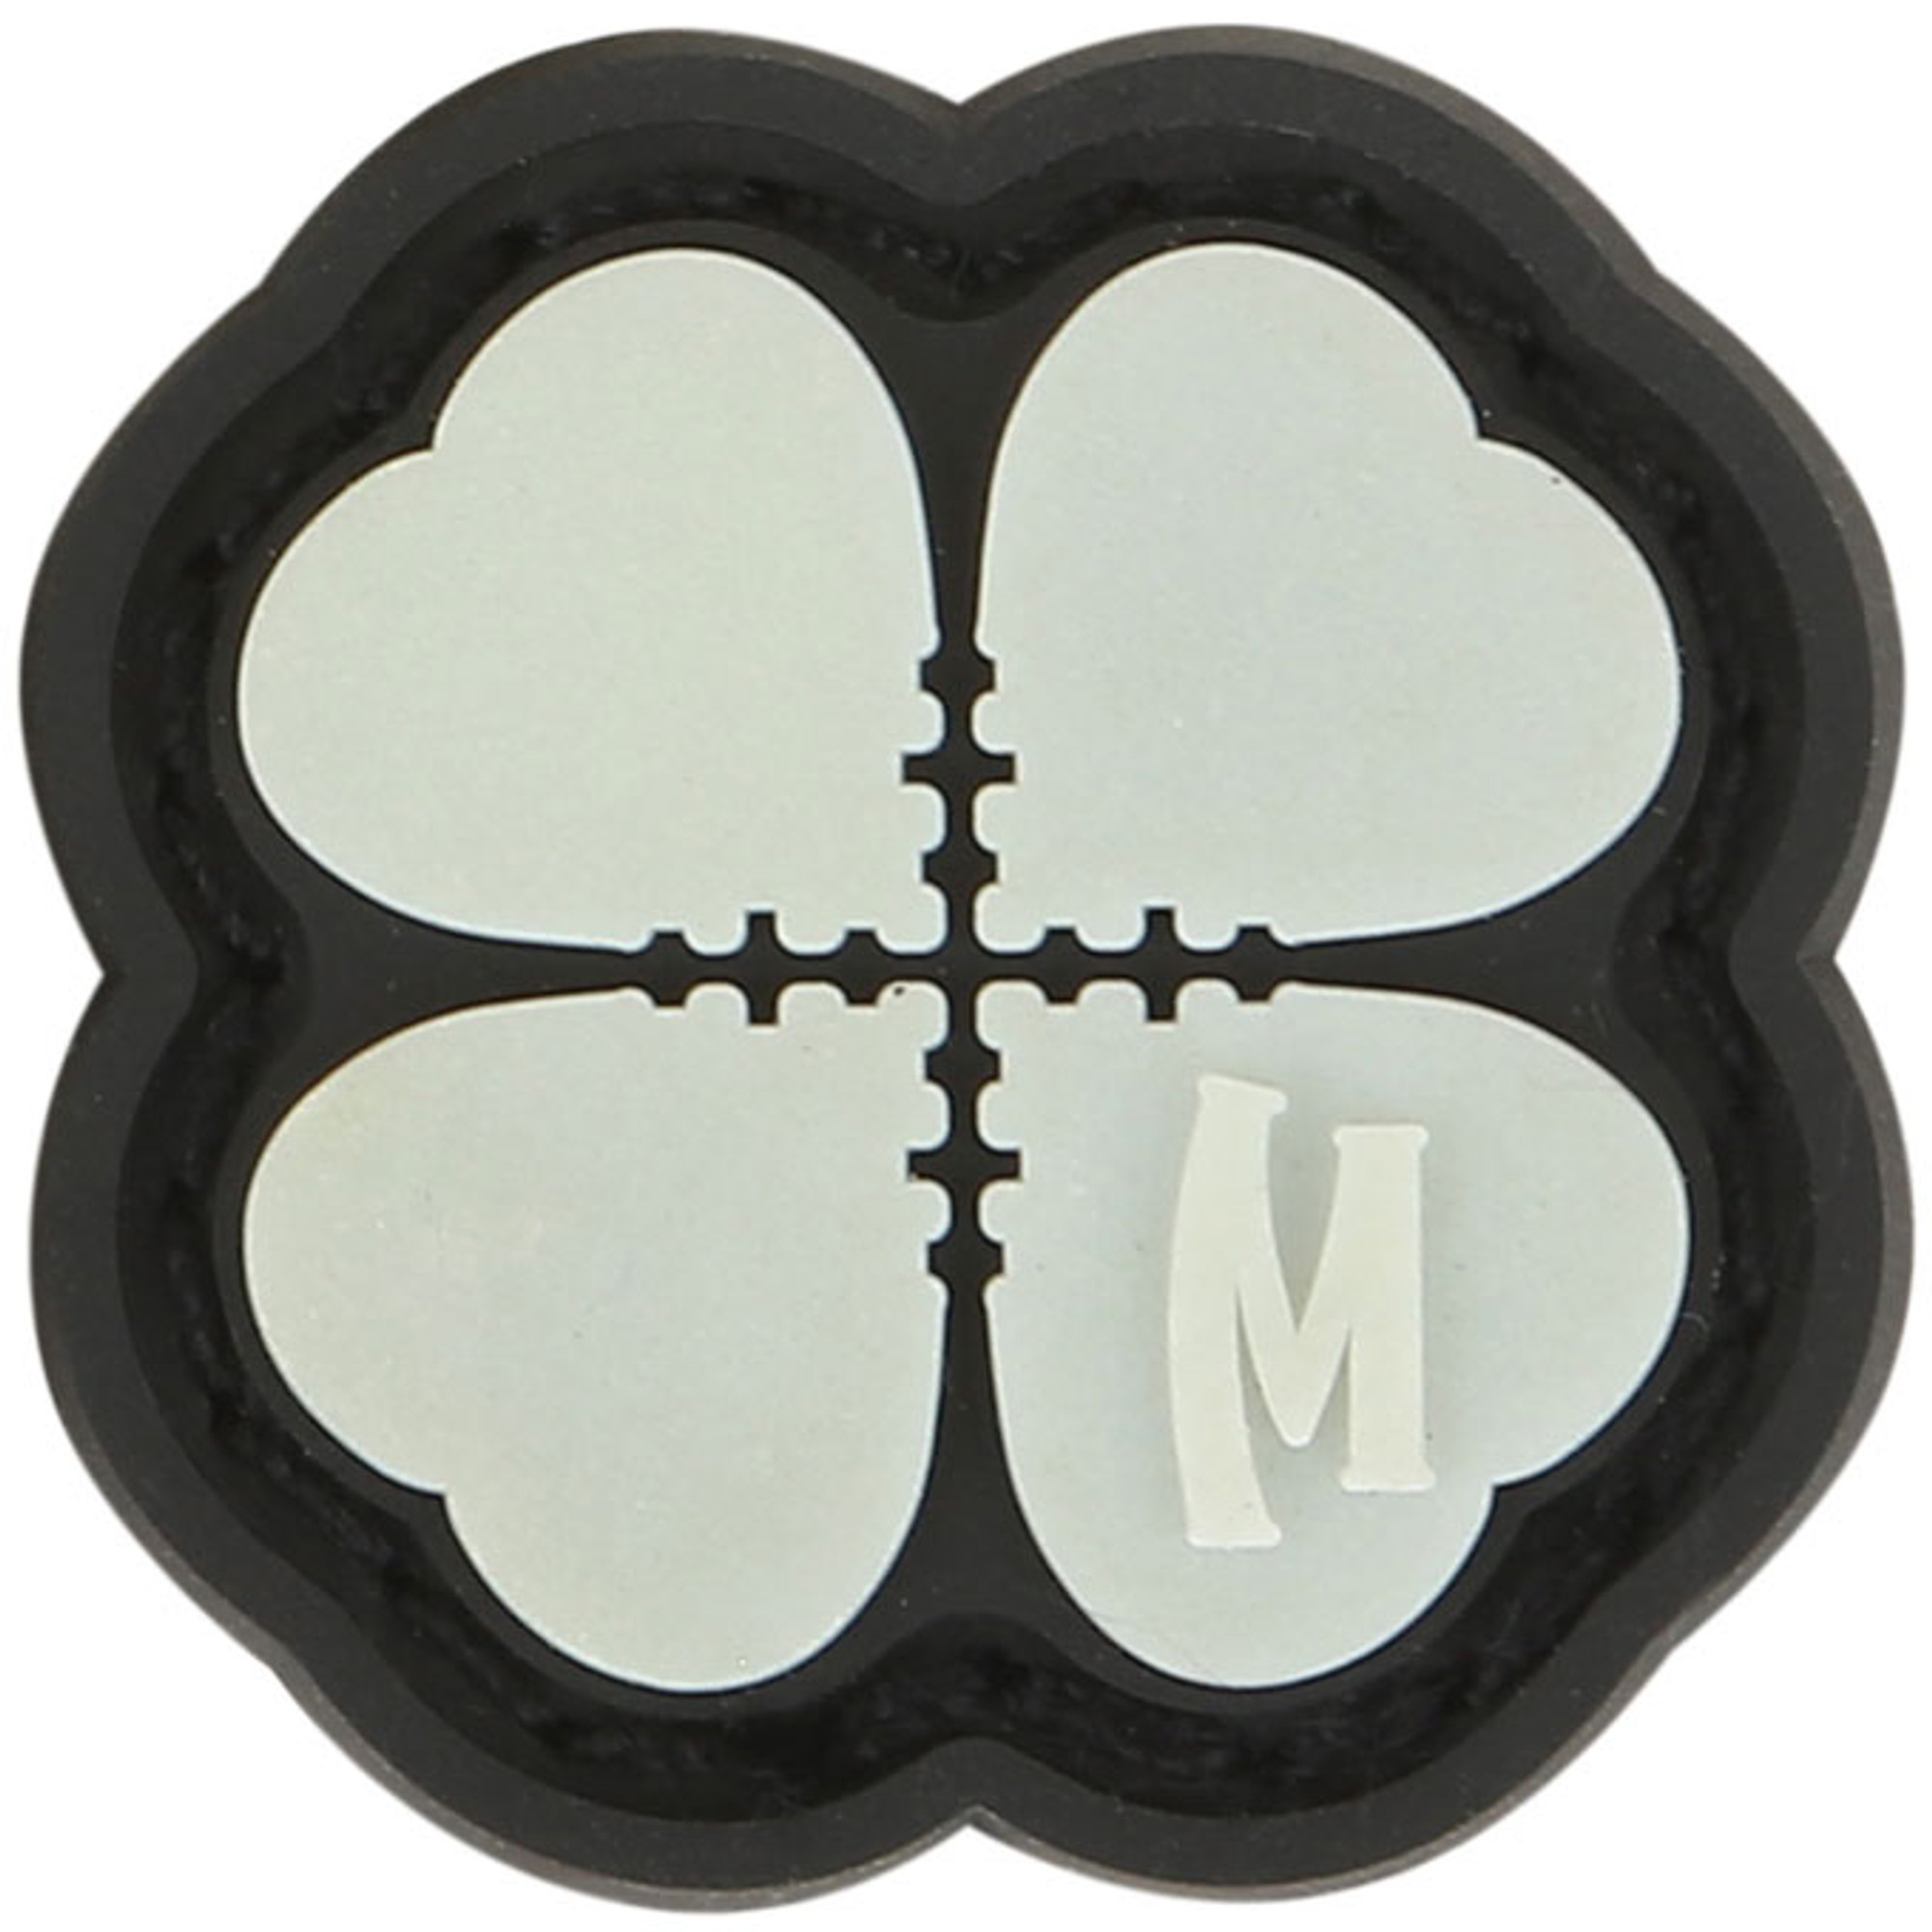 Lucky Shot Clover PVC Micro Morale Patch - Glow In The Dark